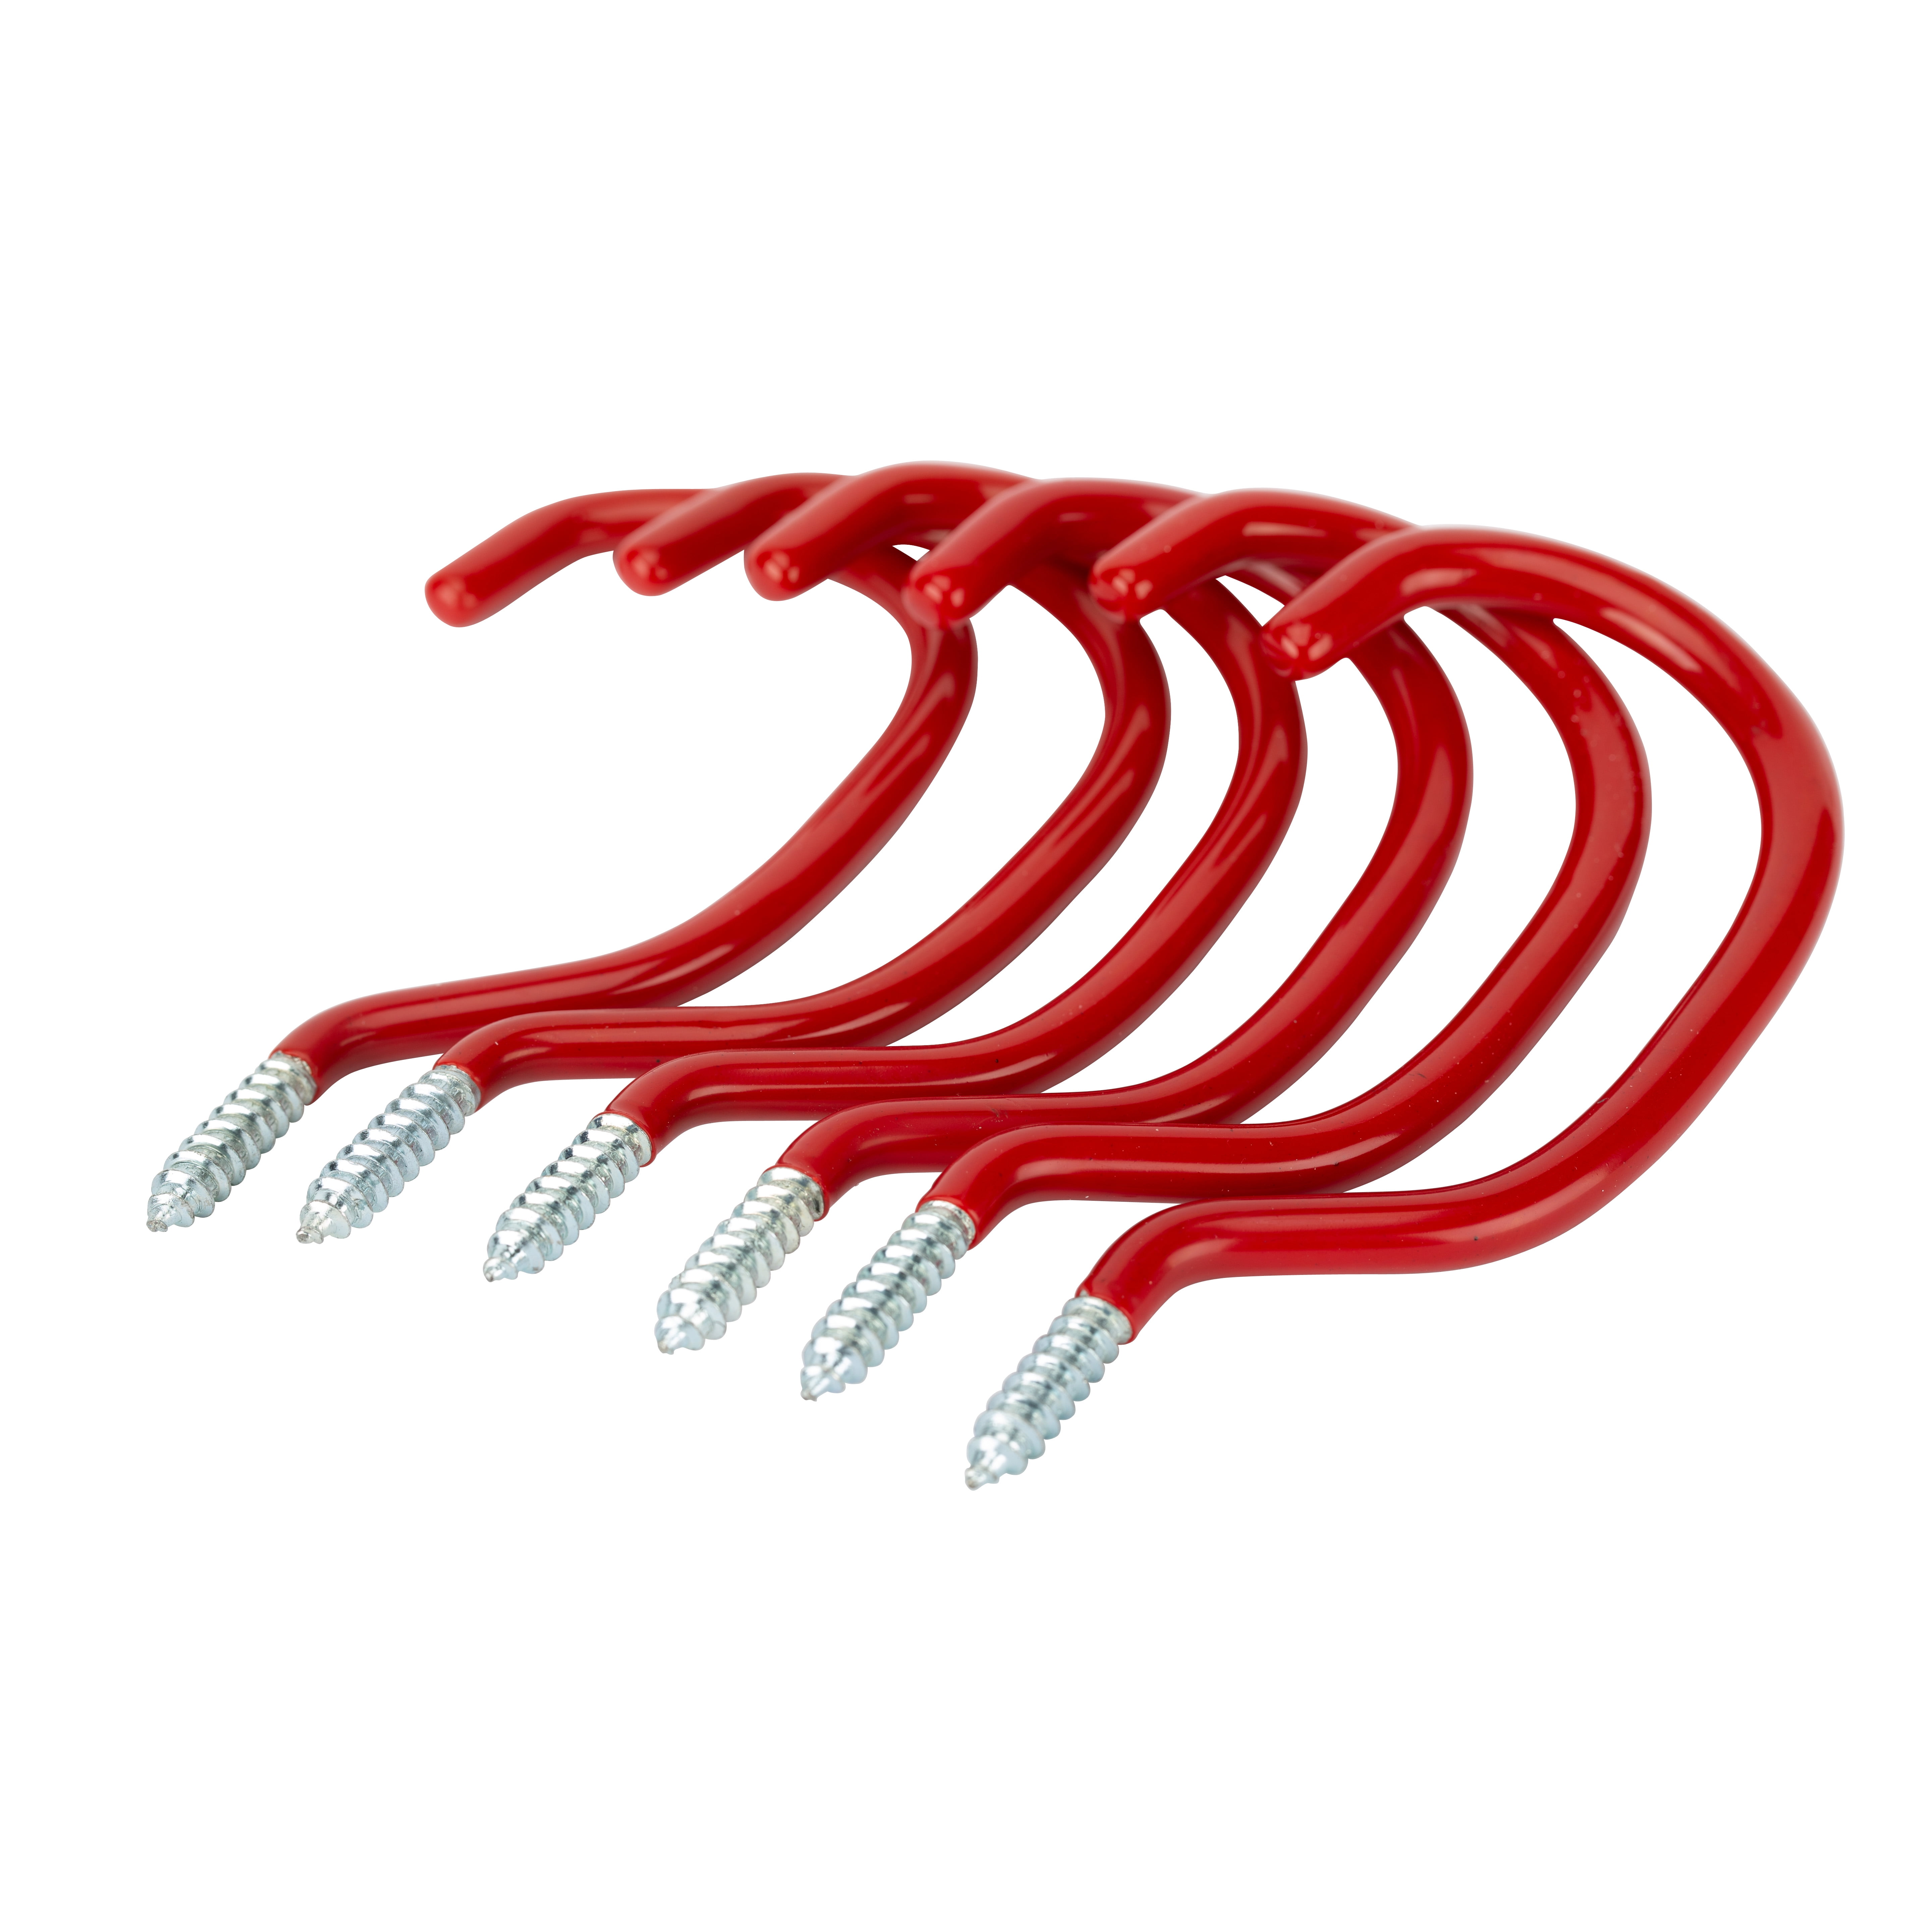 48 x RED Plastic Coated Screw in Tool Utility Hooks with Wall Plug